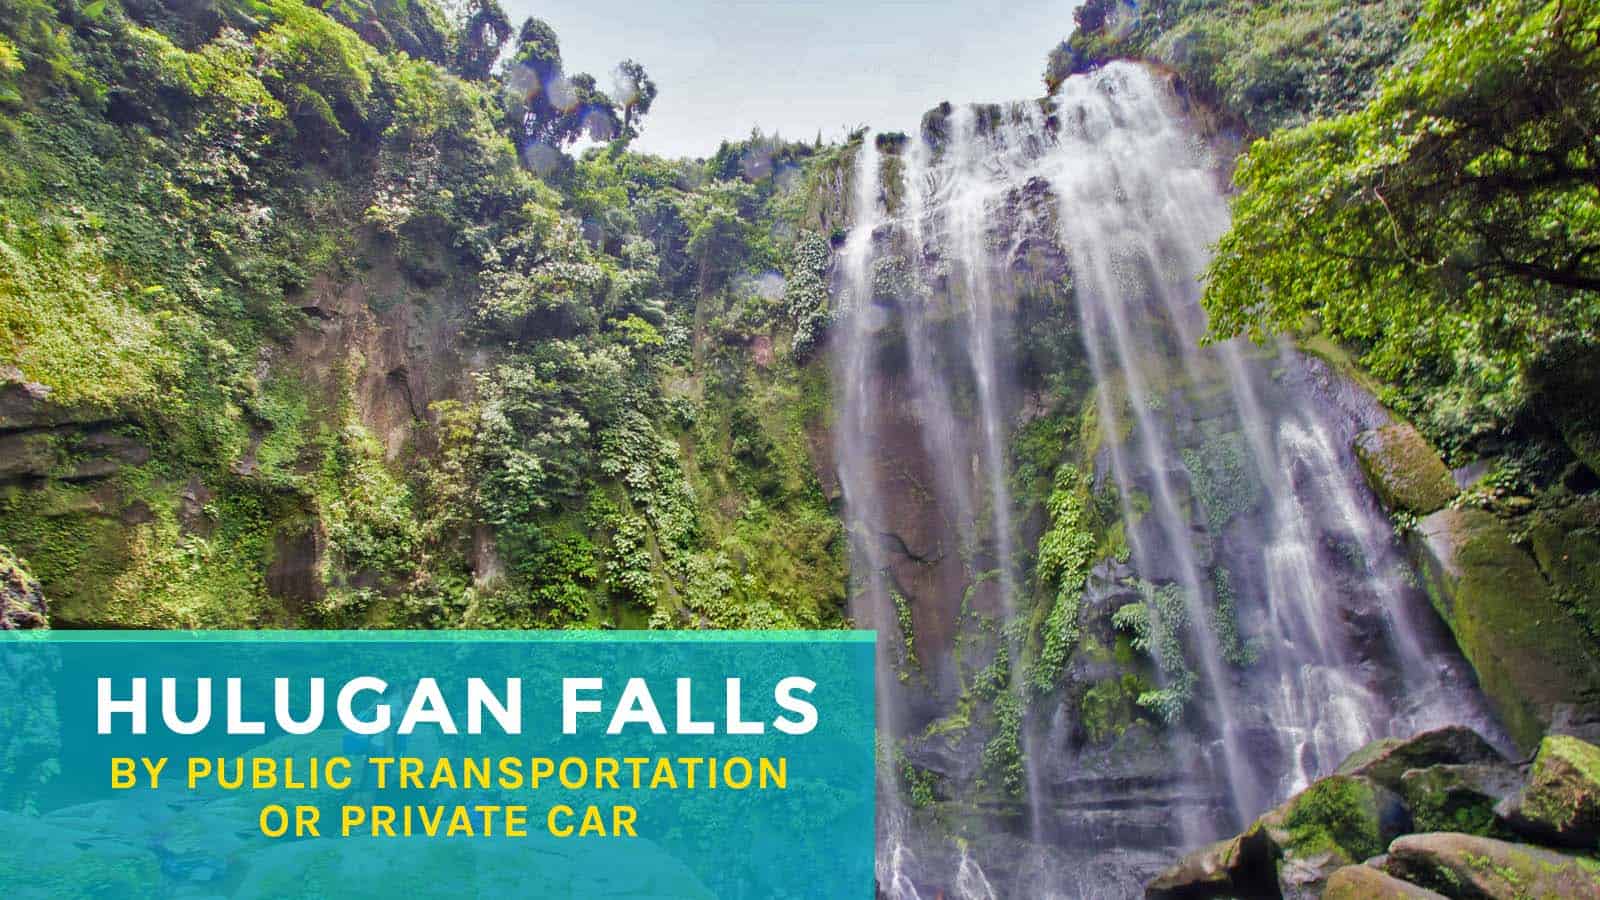 How to Get to Hulugan Falls from Manila: By Bus or Private Car